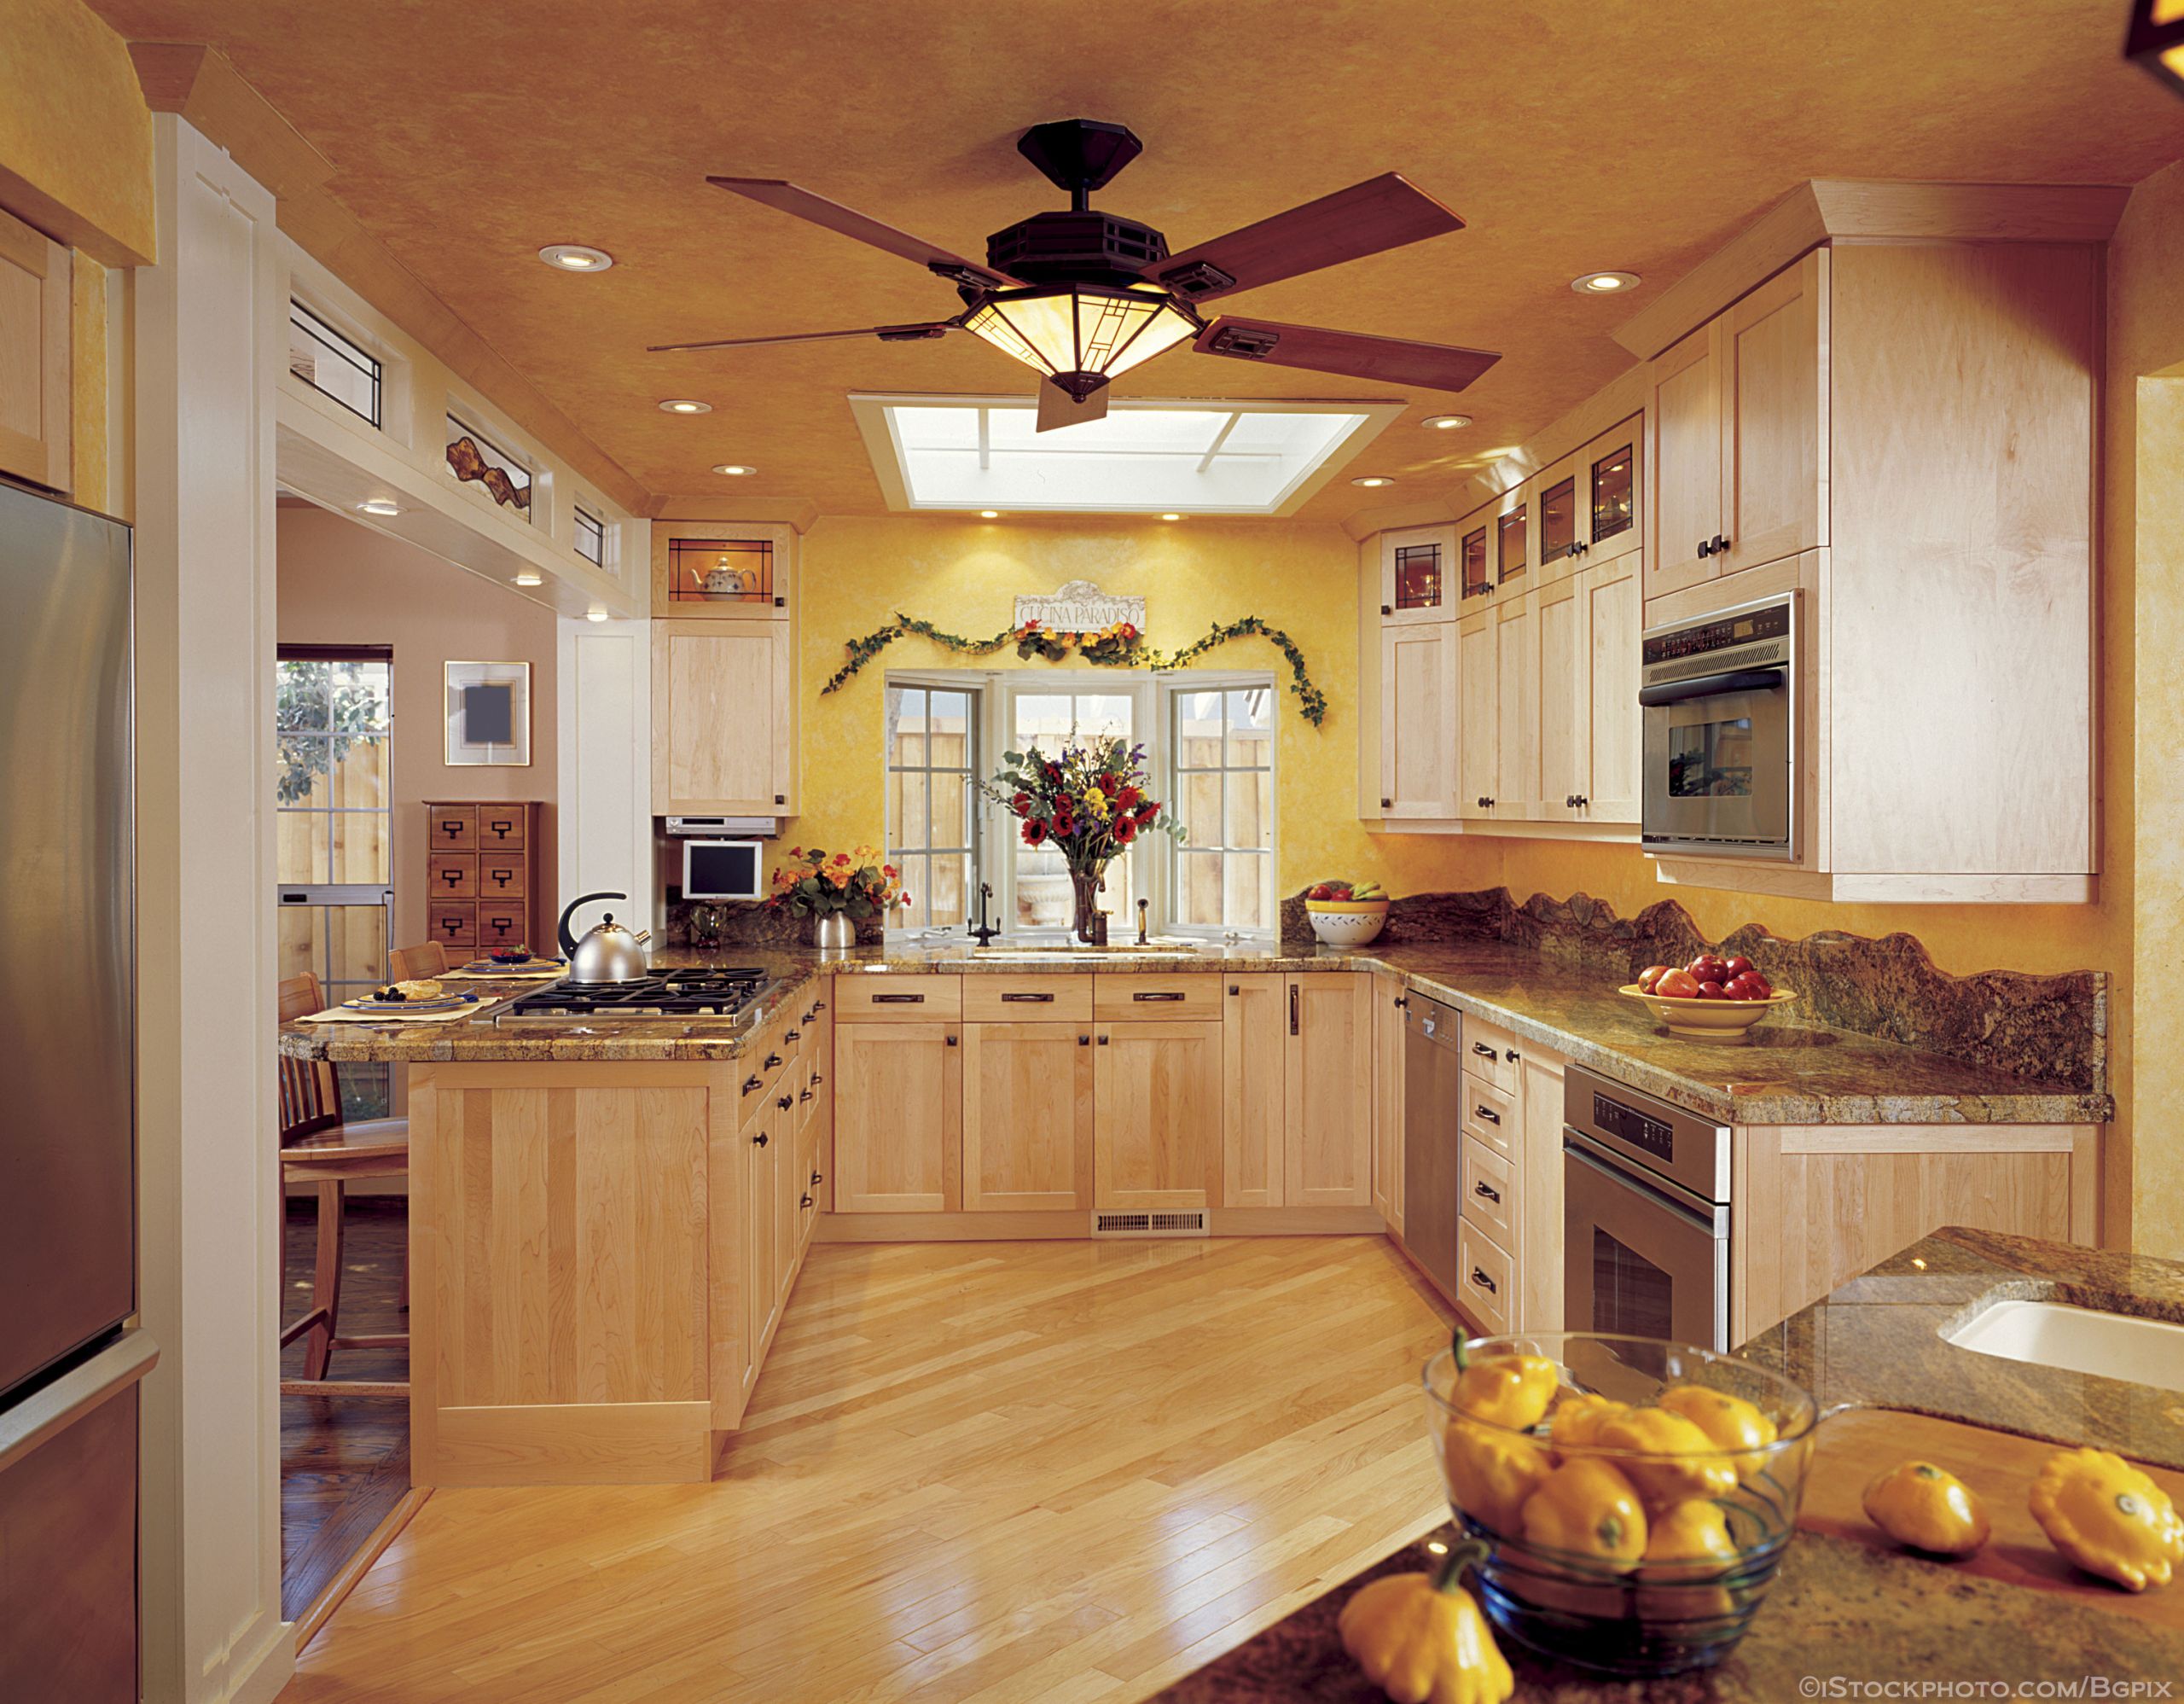 Kitchen Fan With Lights
 Save Money with Celing Fans Go Green with an Energy Star